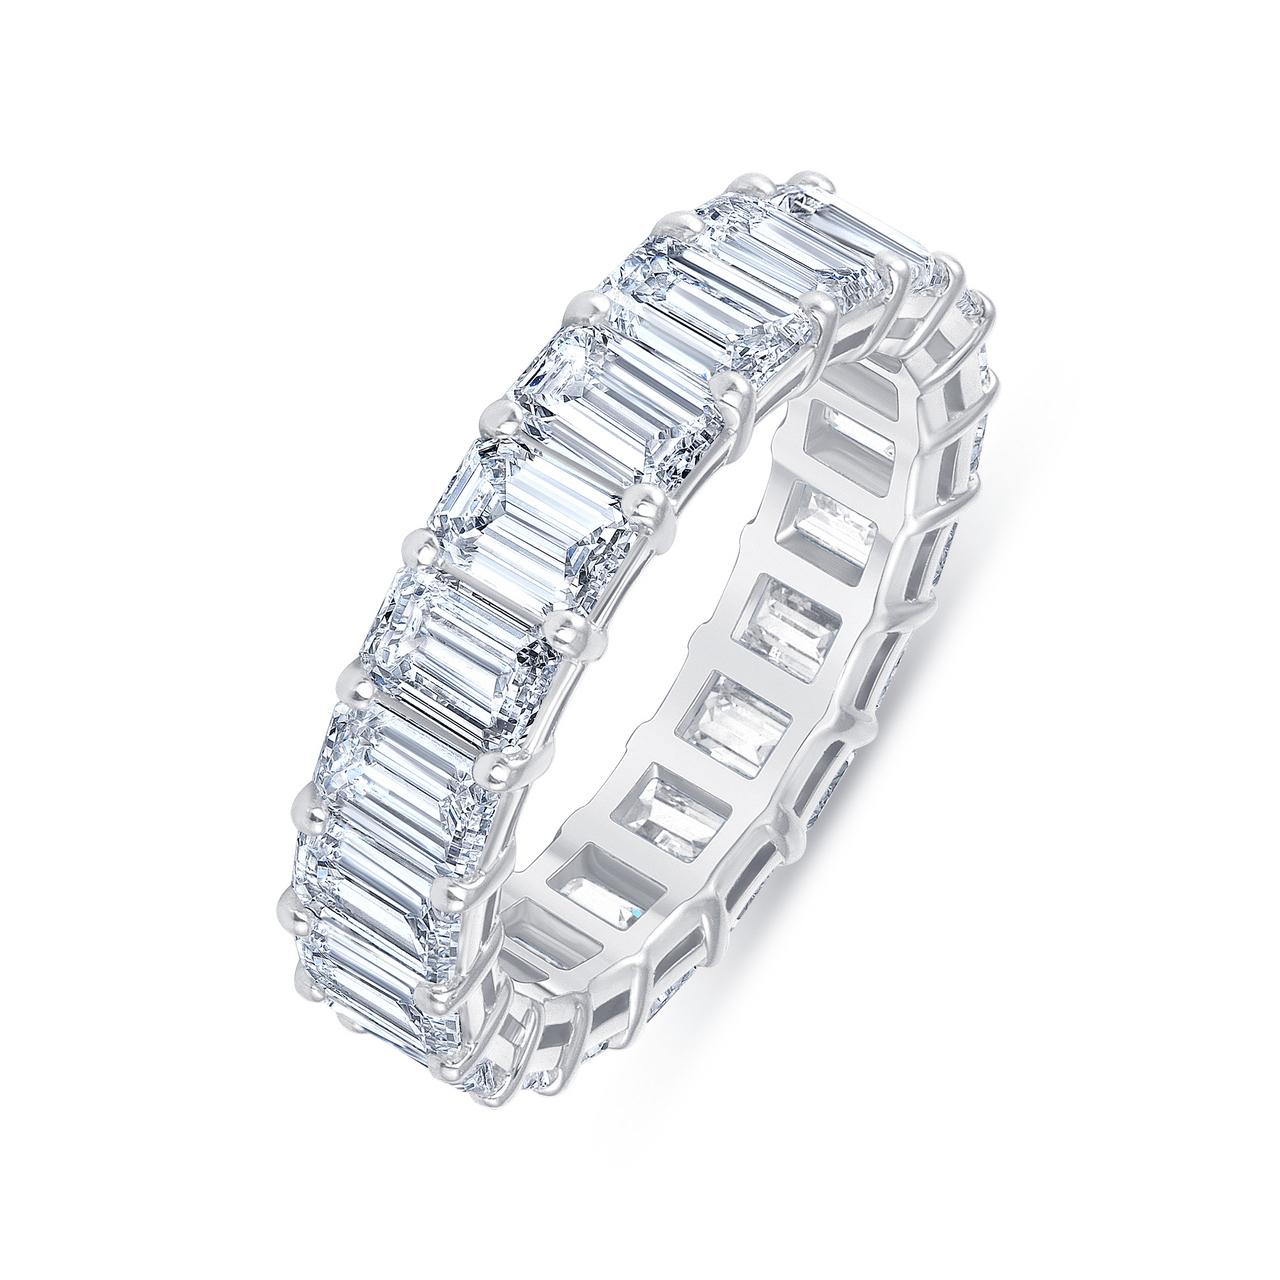 Contemporary HRD Certified 5.65 Carat Emerald Cut White Diamond Eternity Ring / Band Rings For Sale